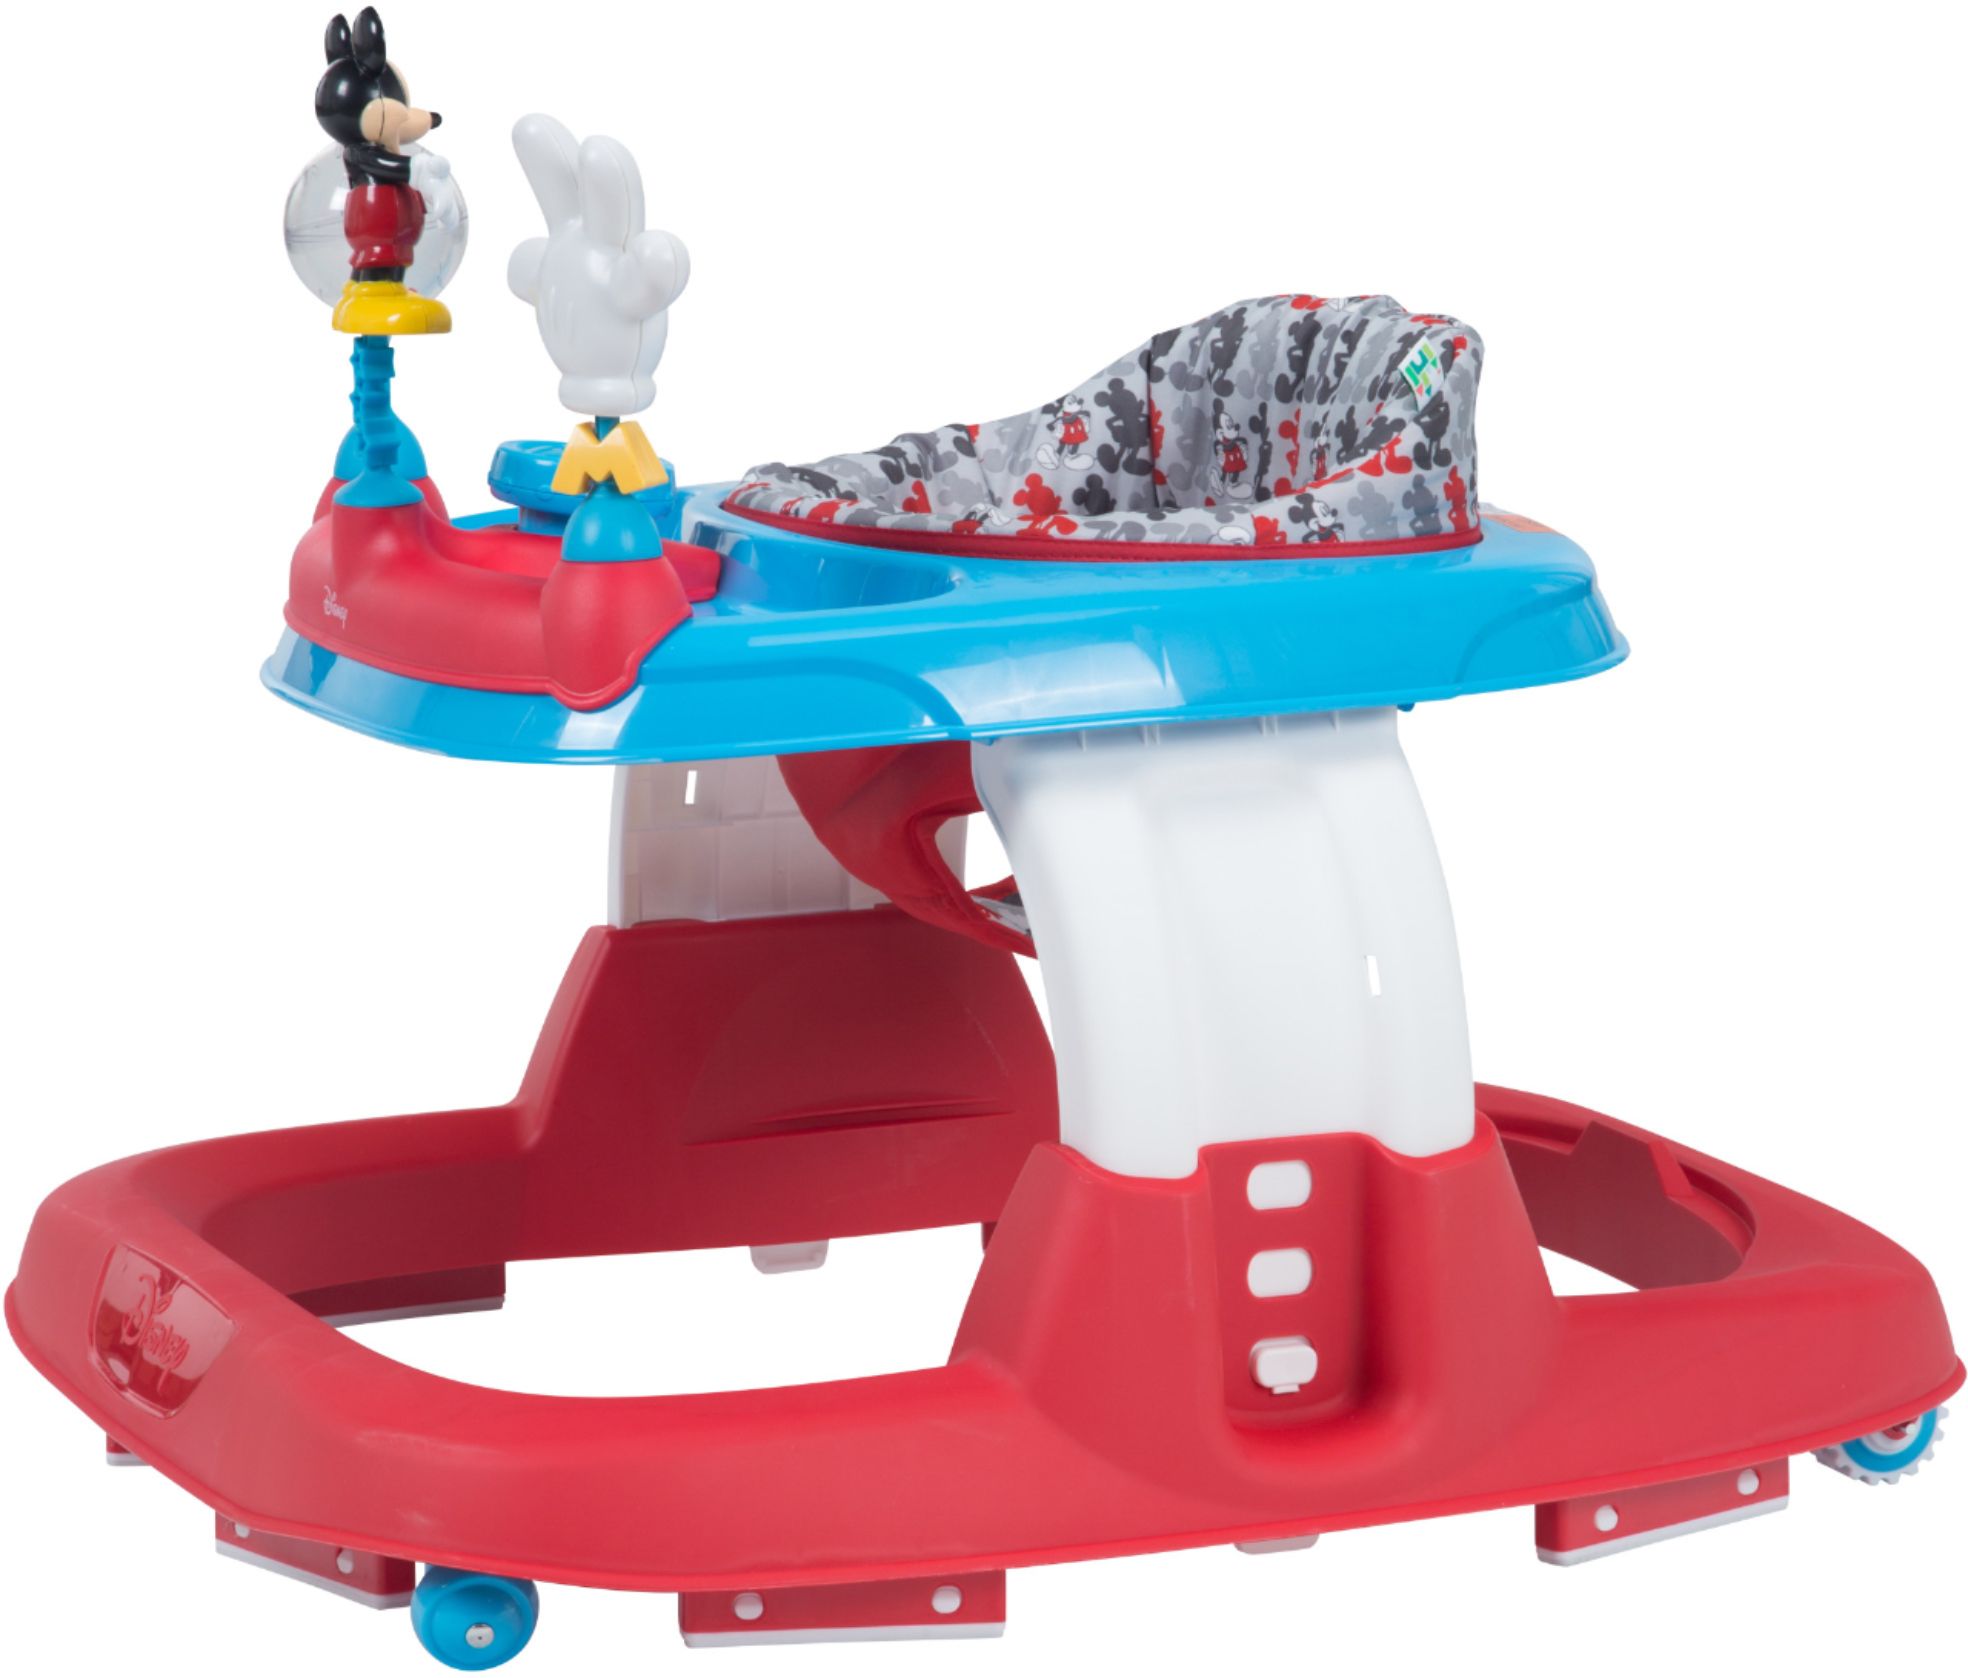 mickey mouse baby walker